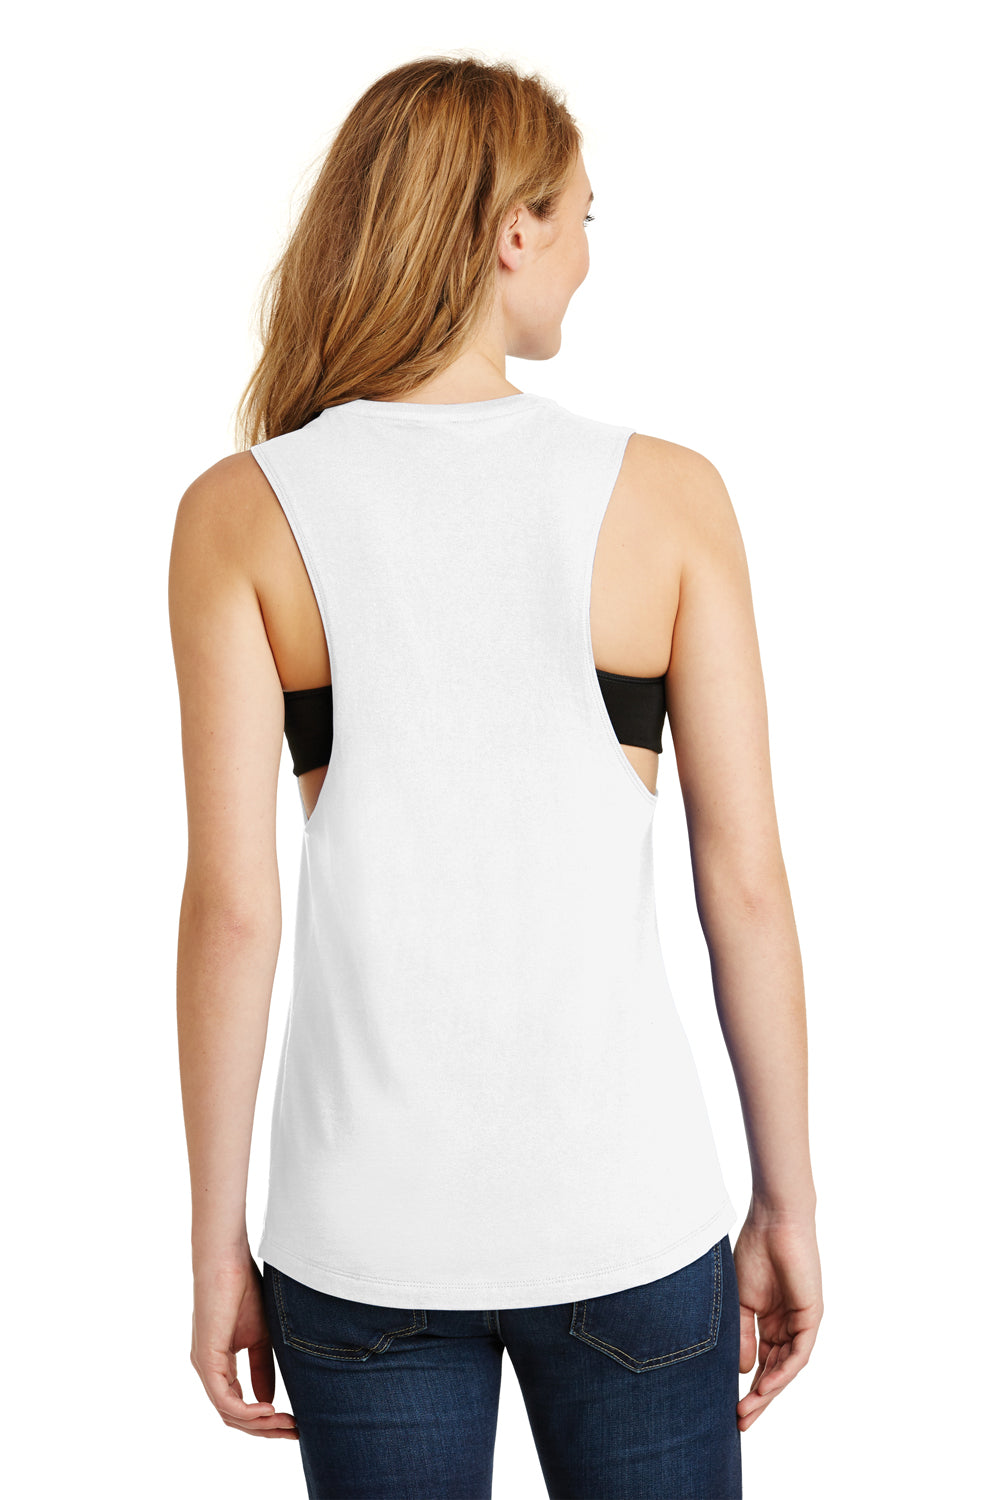 District DT6301 Womens Very Important Festival Tank Top White Back